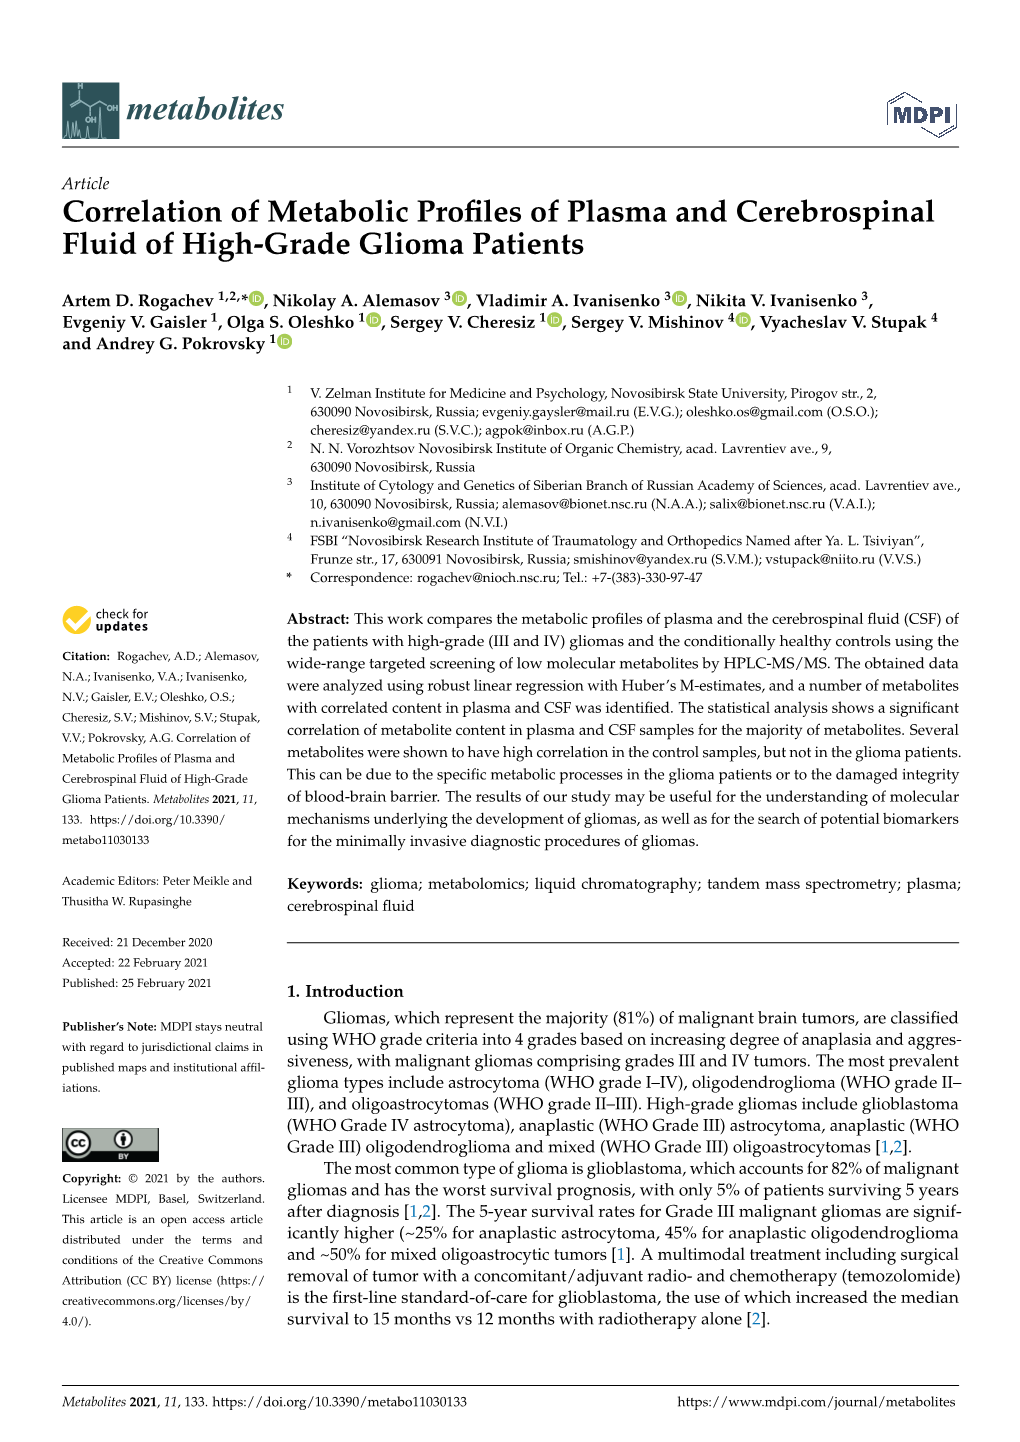 Correlation of Metabolic Profiles of Plasma and Cerebrospinal Fluid Of